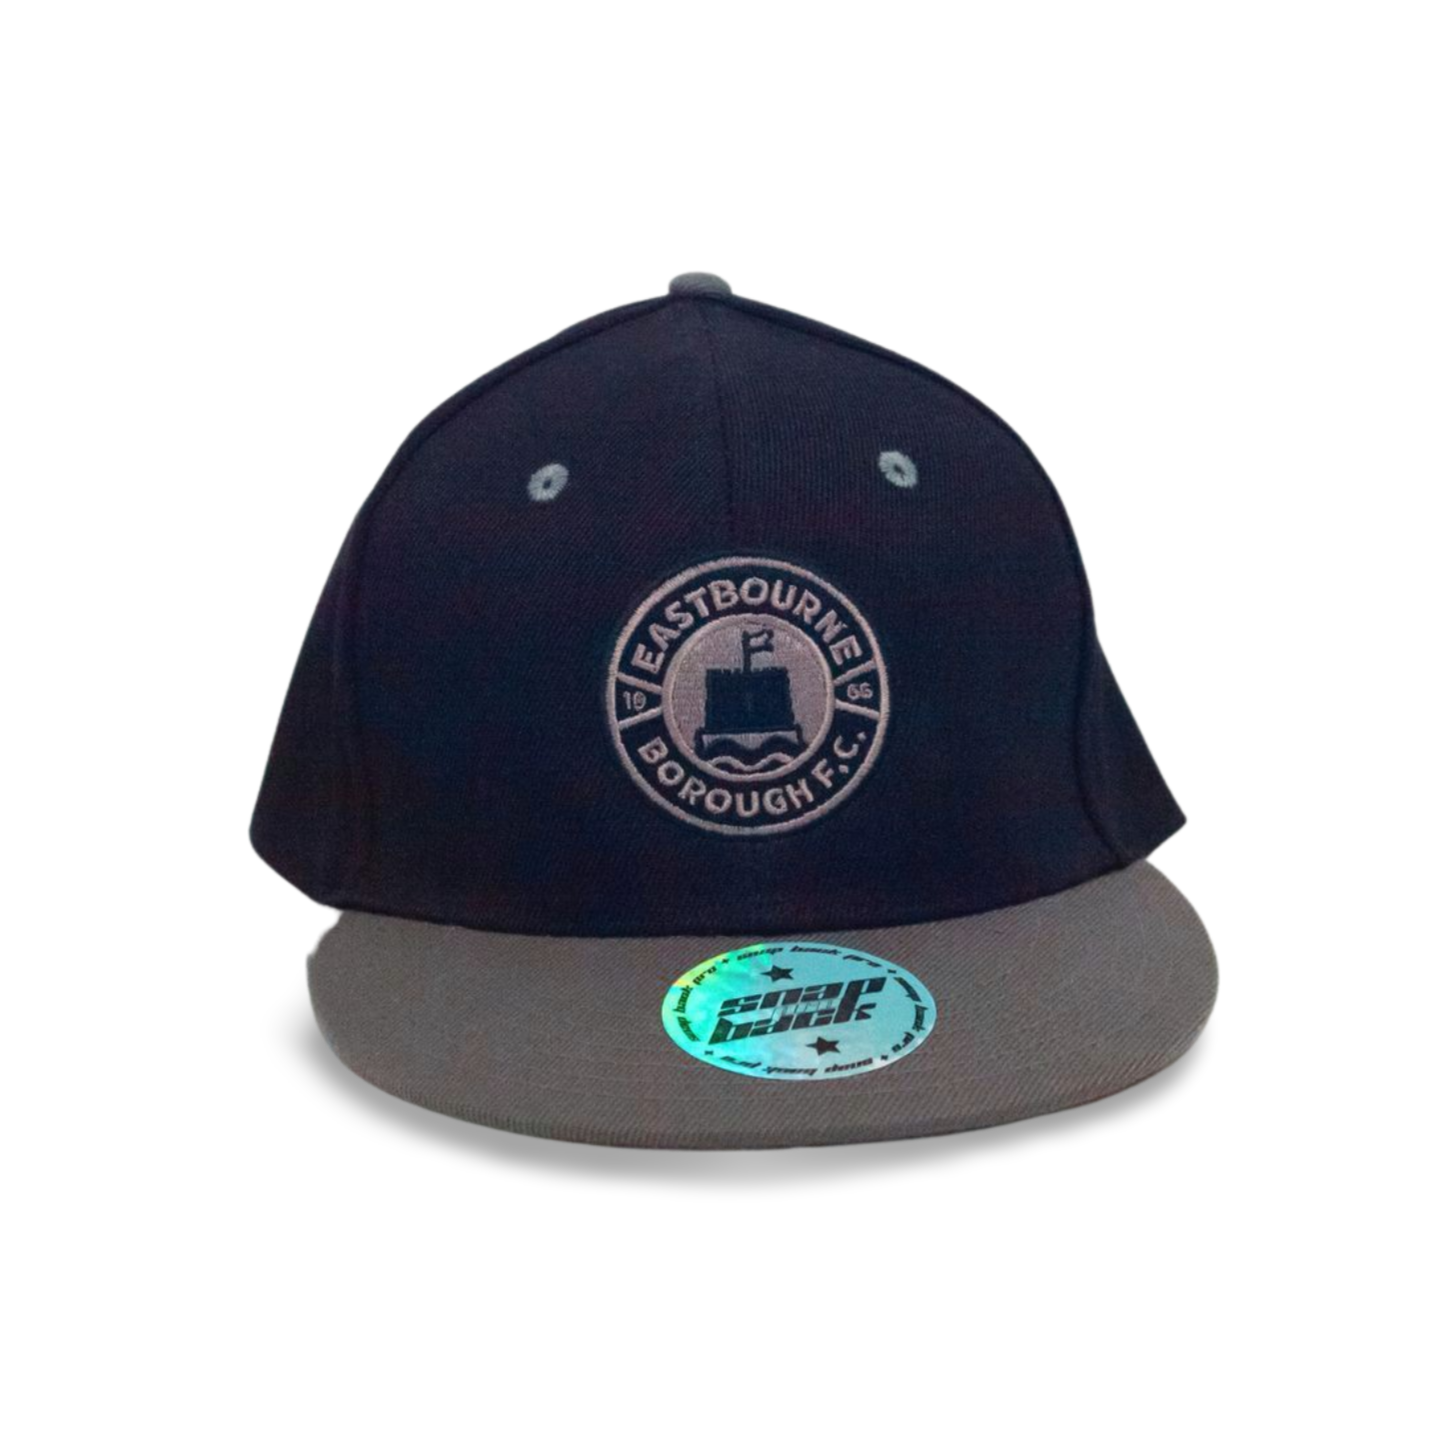 Navy Embroidered Snap Back Cap